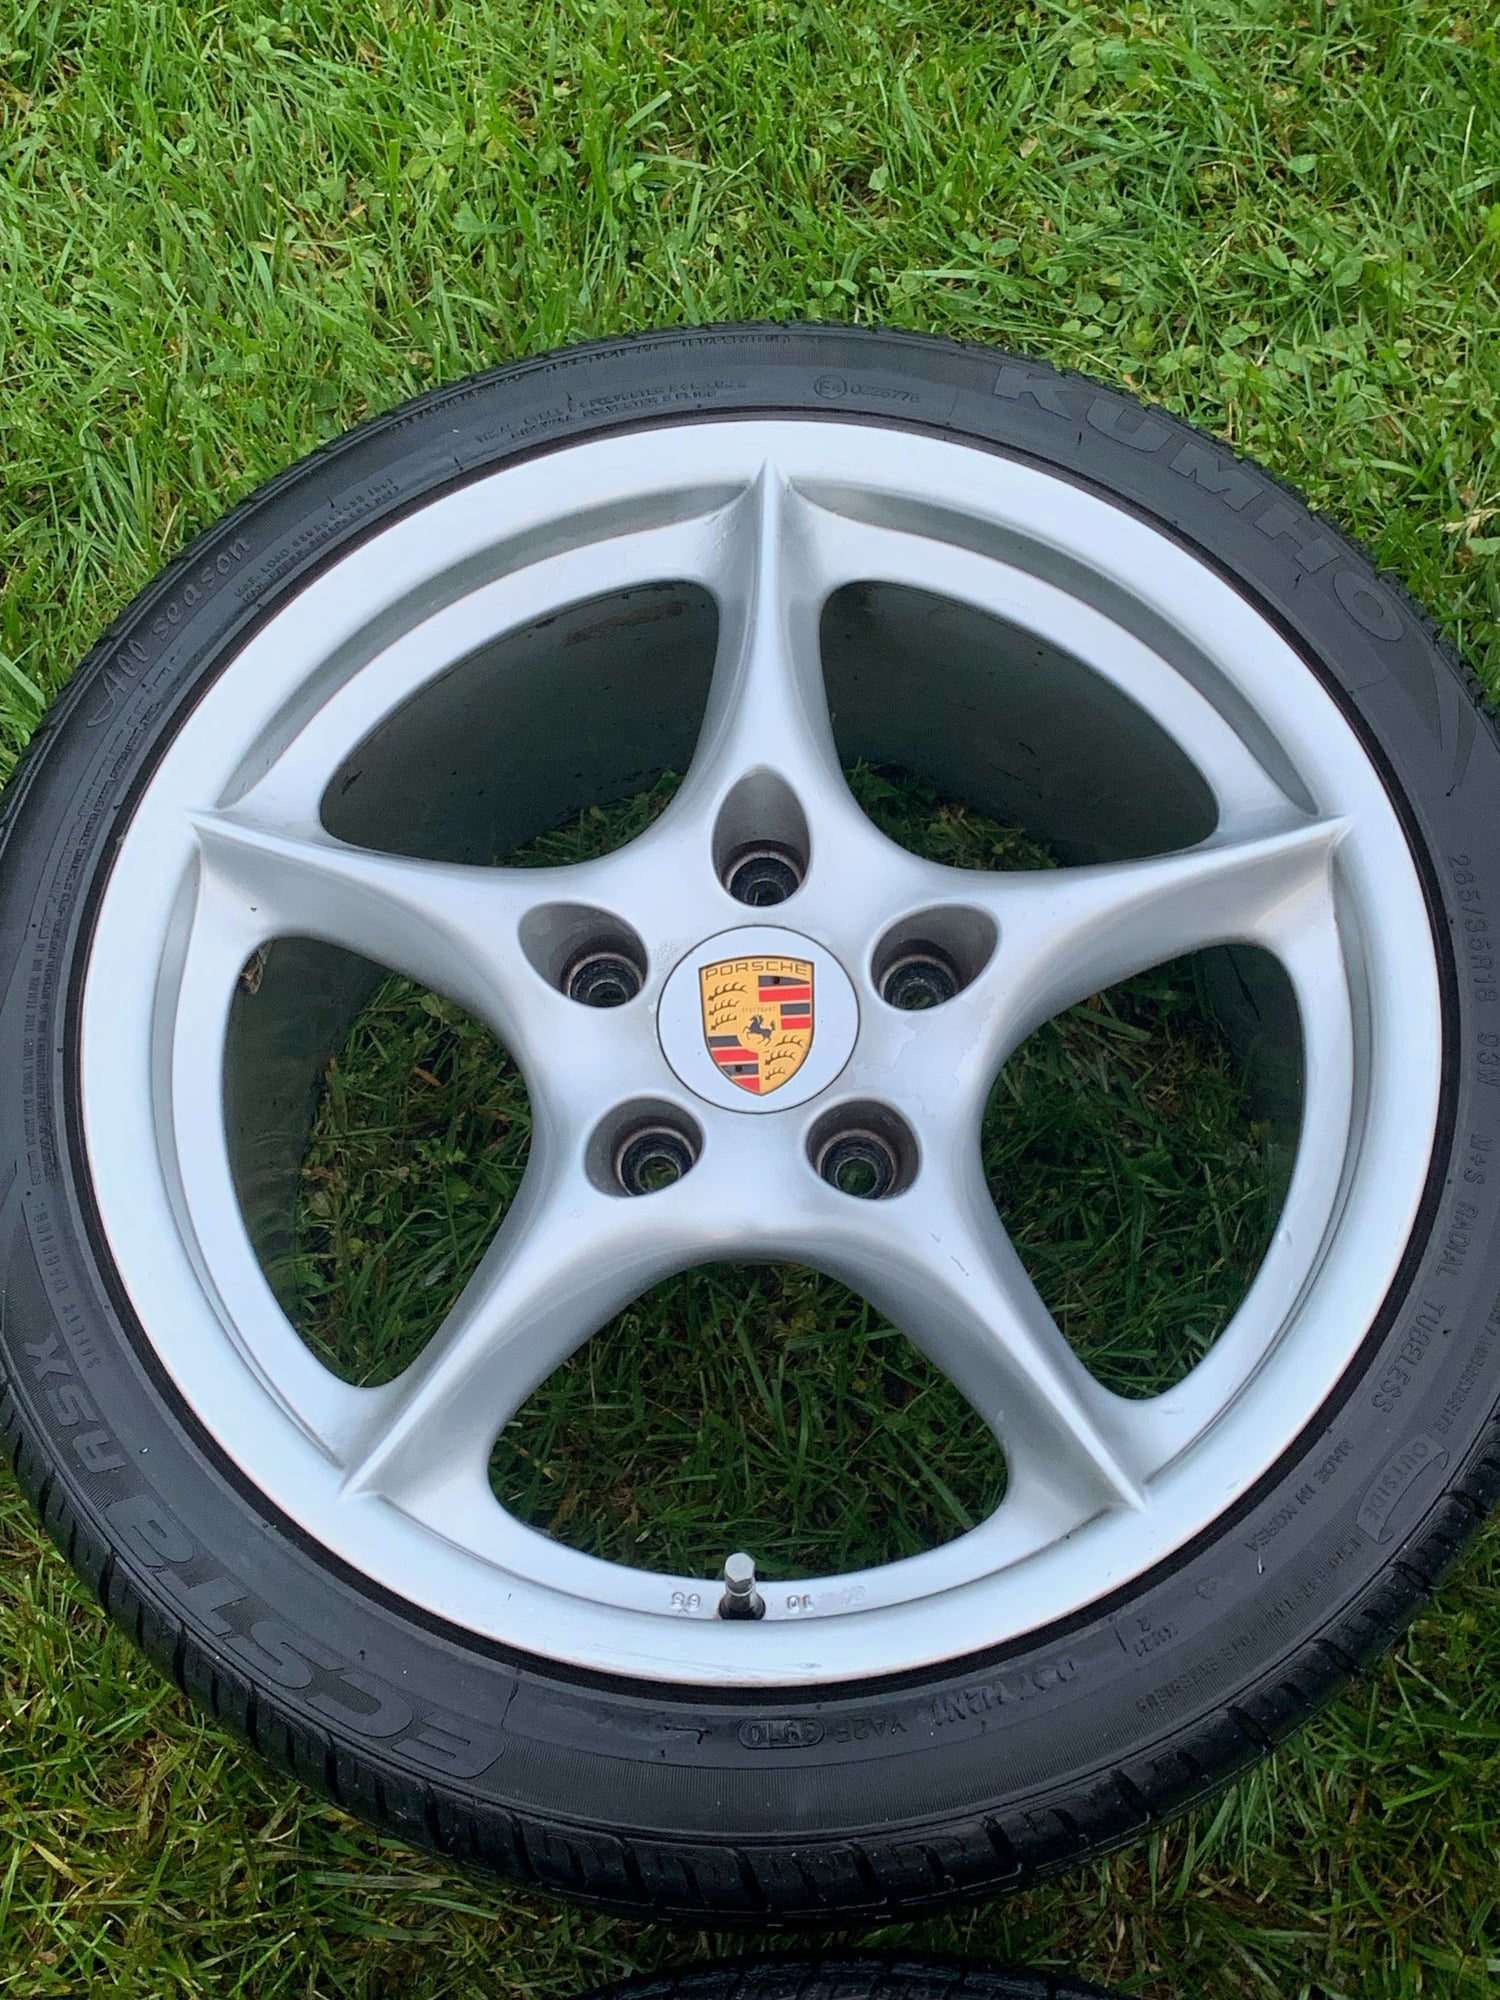 Wheels and Tires/Axles - MY02 18x8/10 - Used - 1999 to 2017 Porsche 911 - West Chester, PA 19380, United States